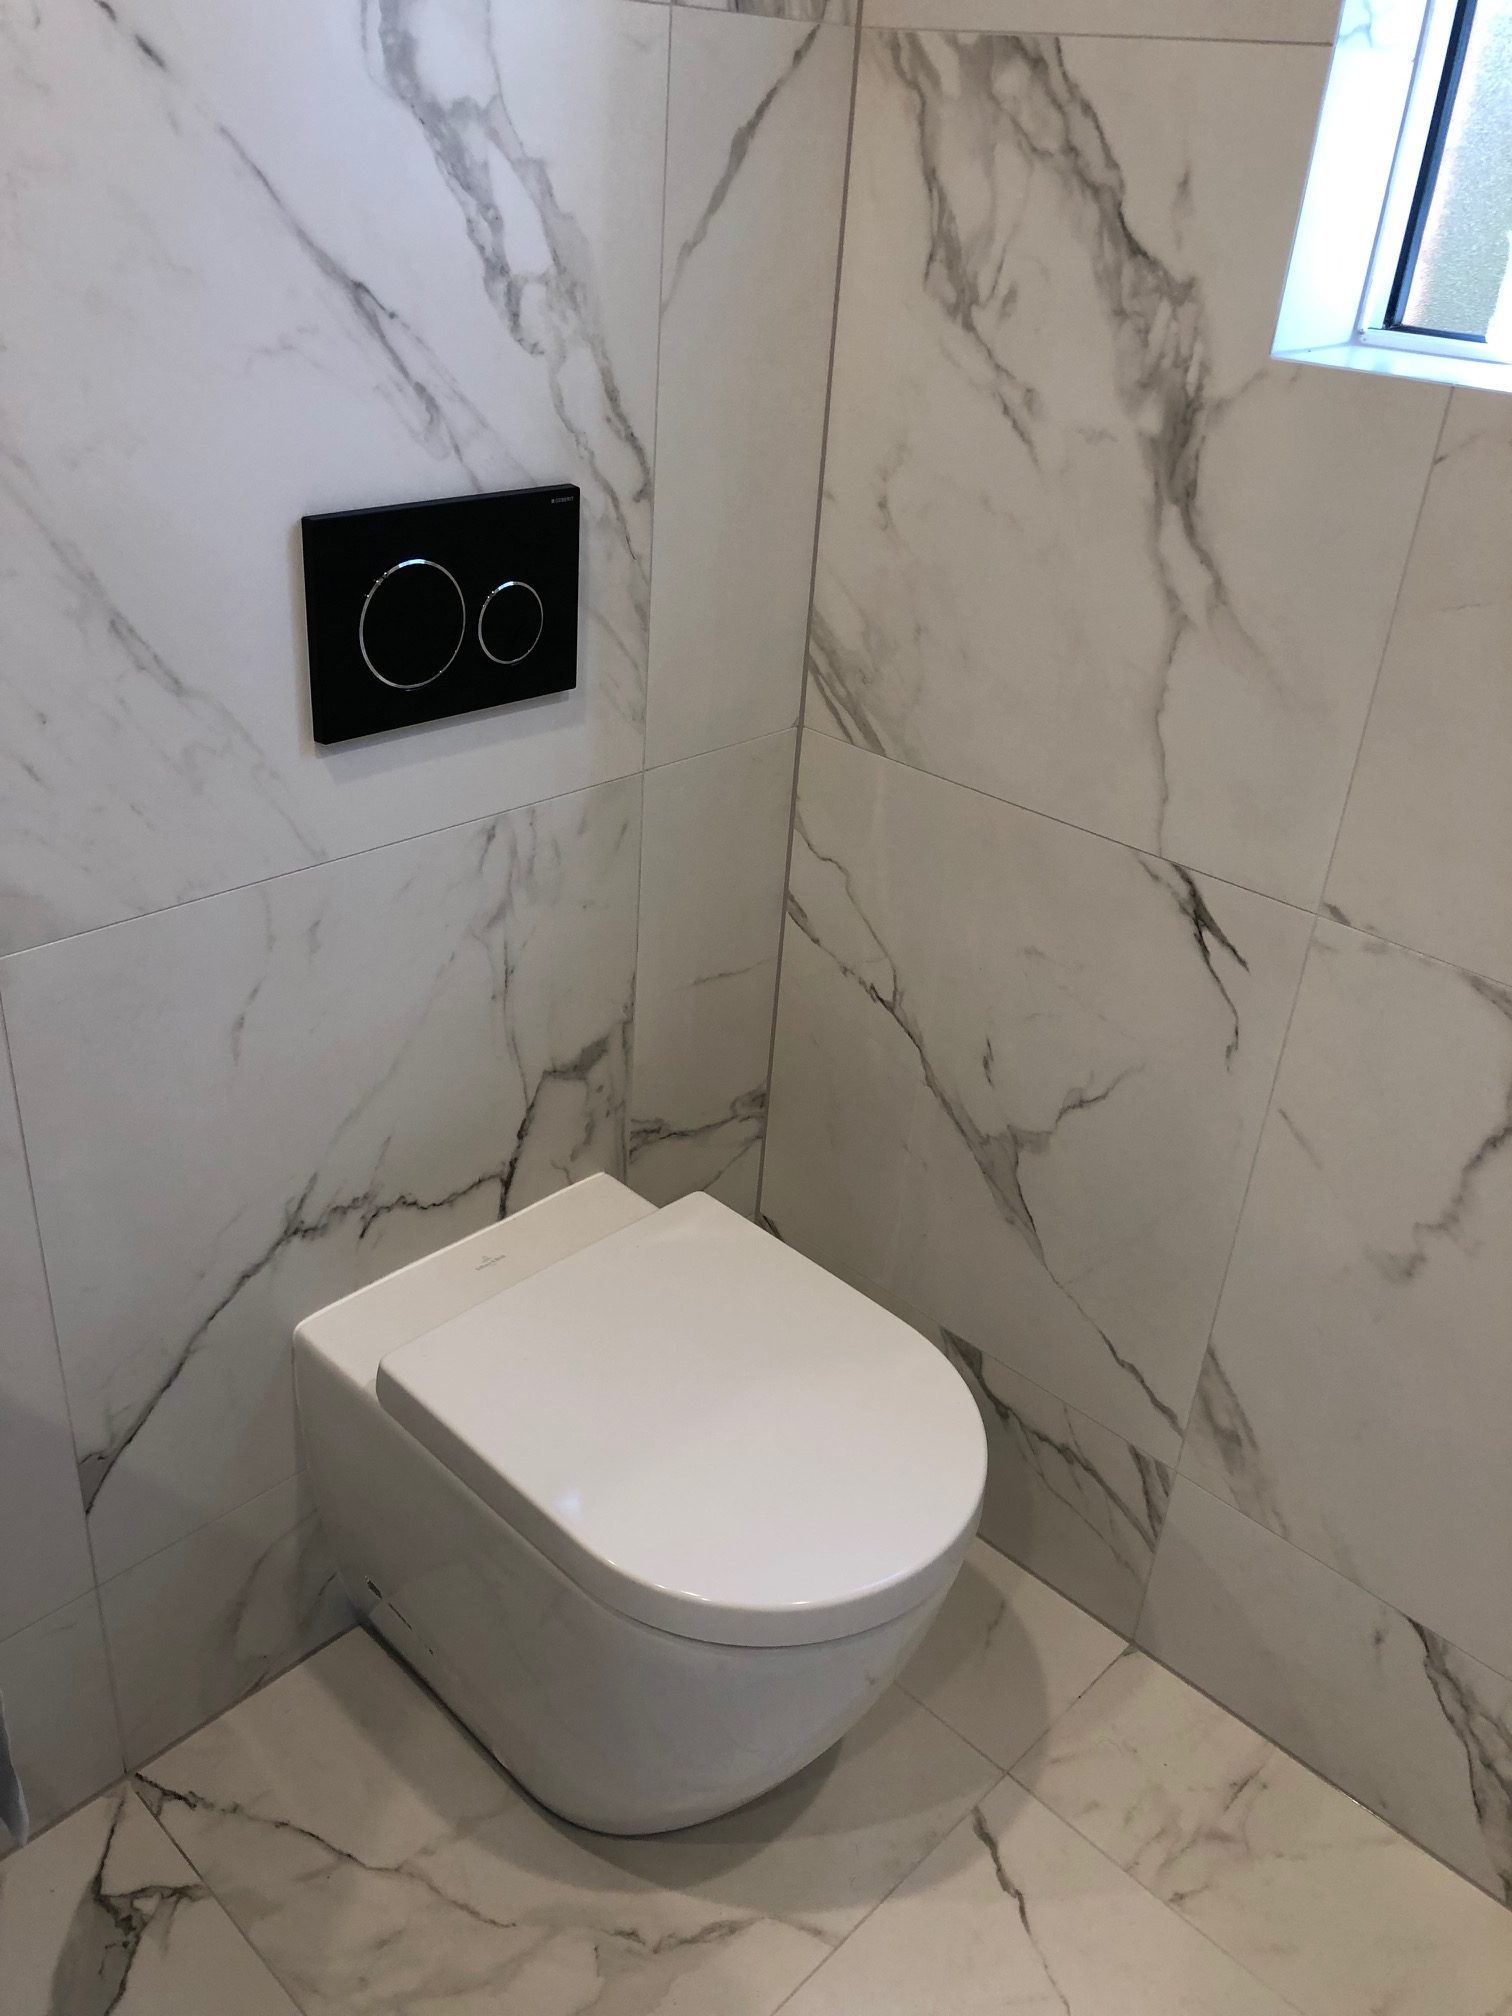 Bathroom toilet area with Warmtech Inscreed heating system